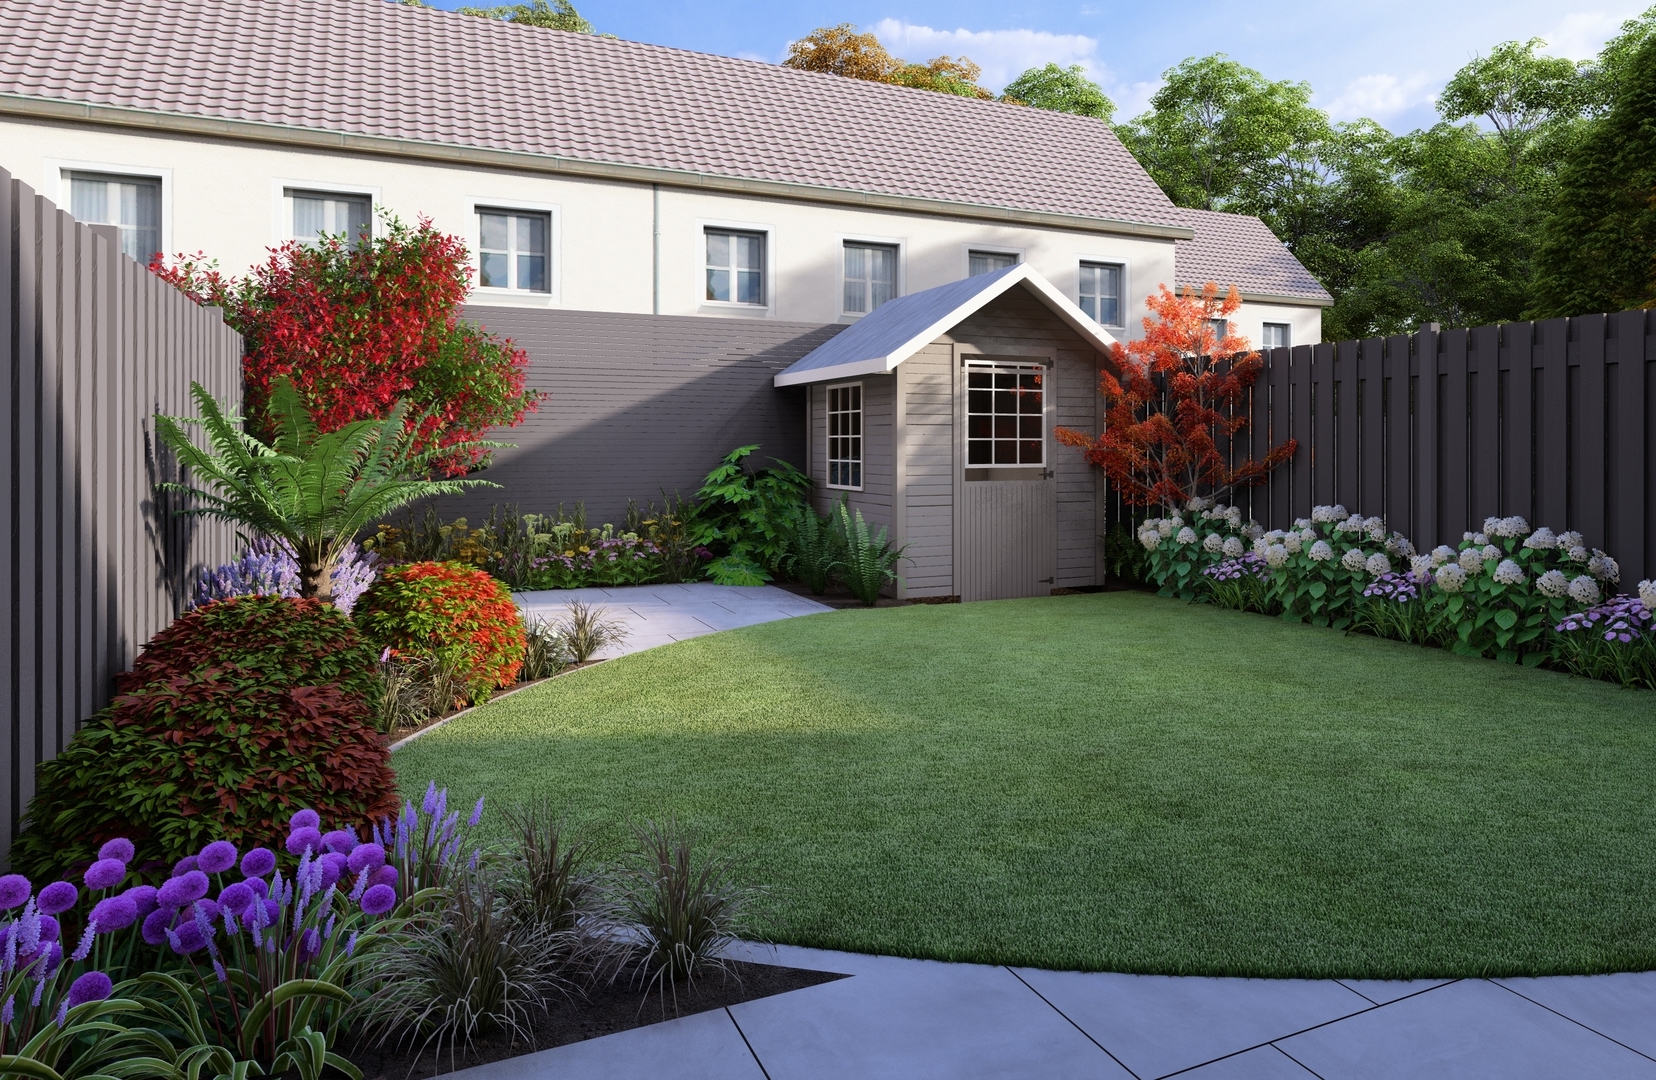 Garden Design Dublin 9 for a compact size family garden features natural limestone paving, bespoke horizontal slat fencing, artificial lawn, specimen trees & shrubs, and colourful mixed planted borders.